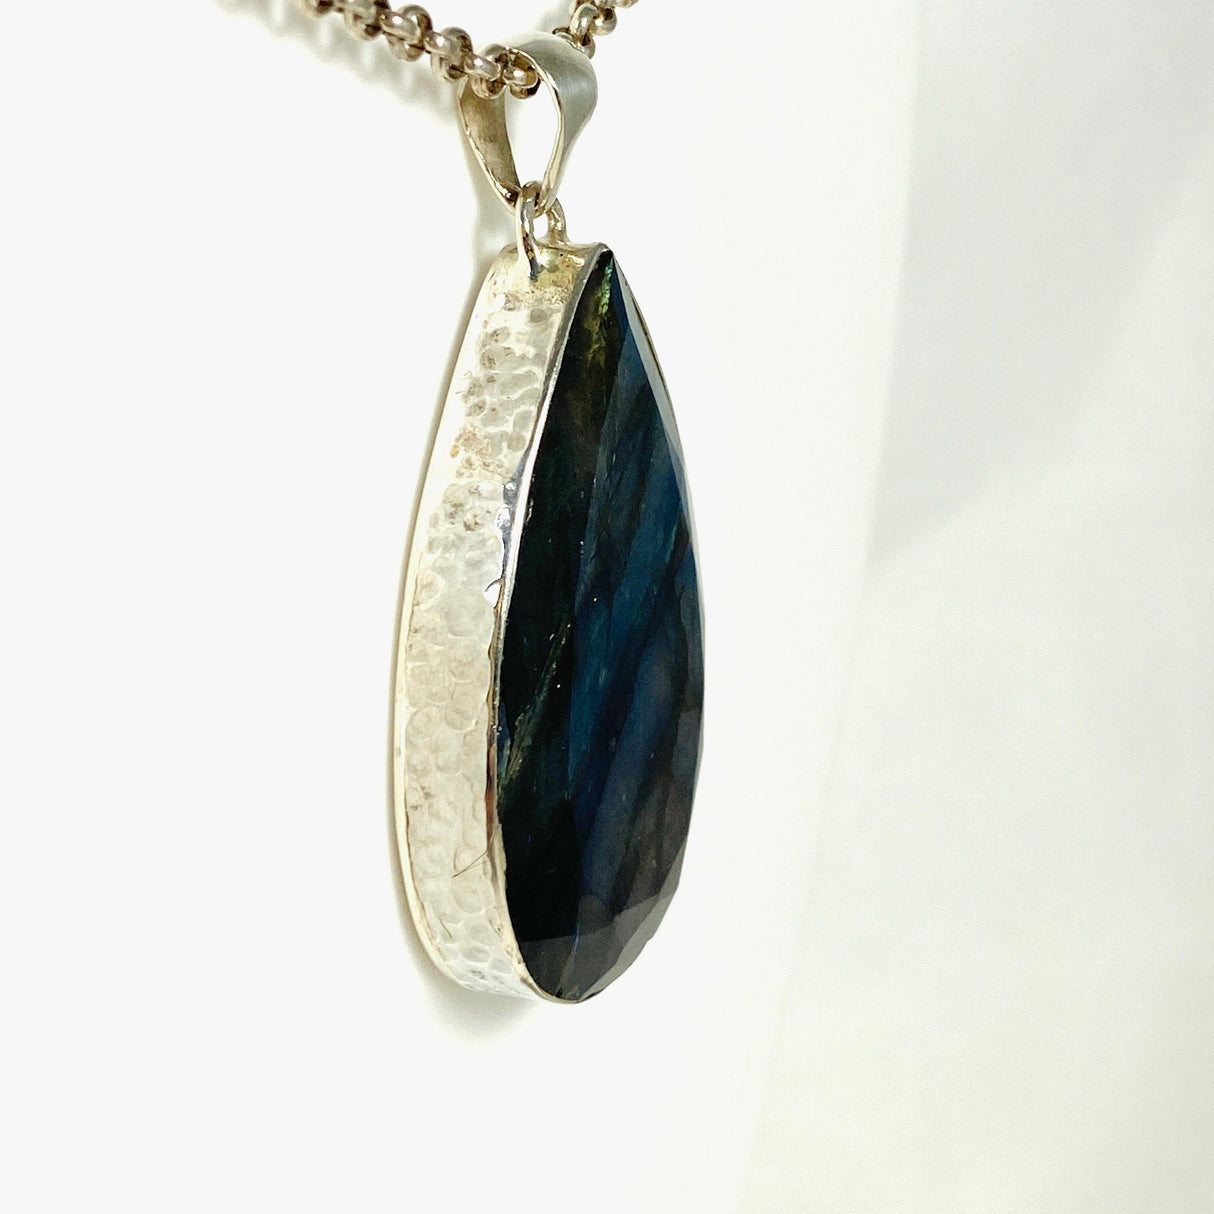 Blue iridescent Labradorite faceted gemstone pendant set in silver on a belcher chain side on angle